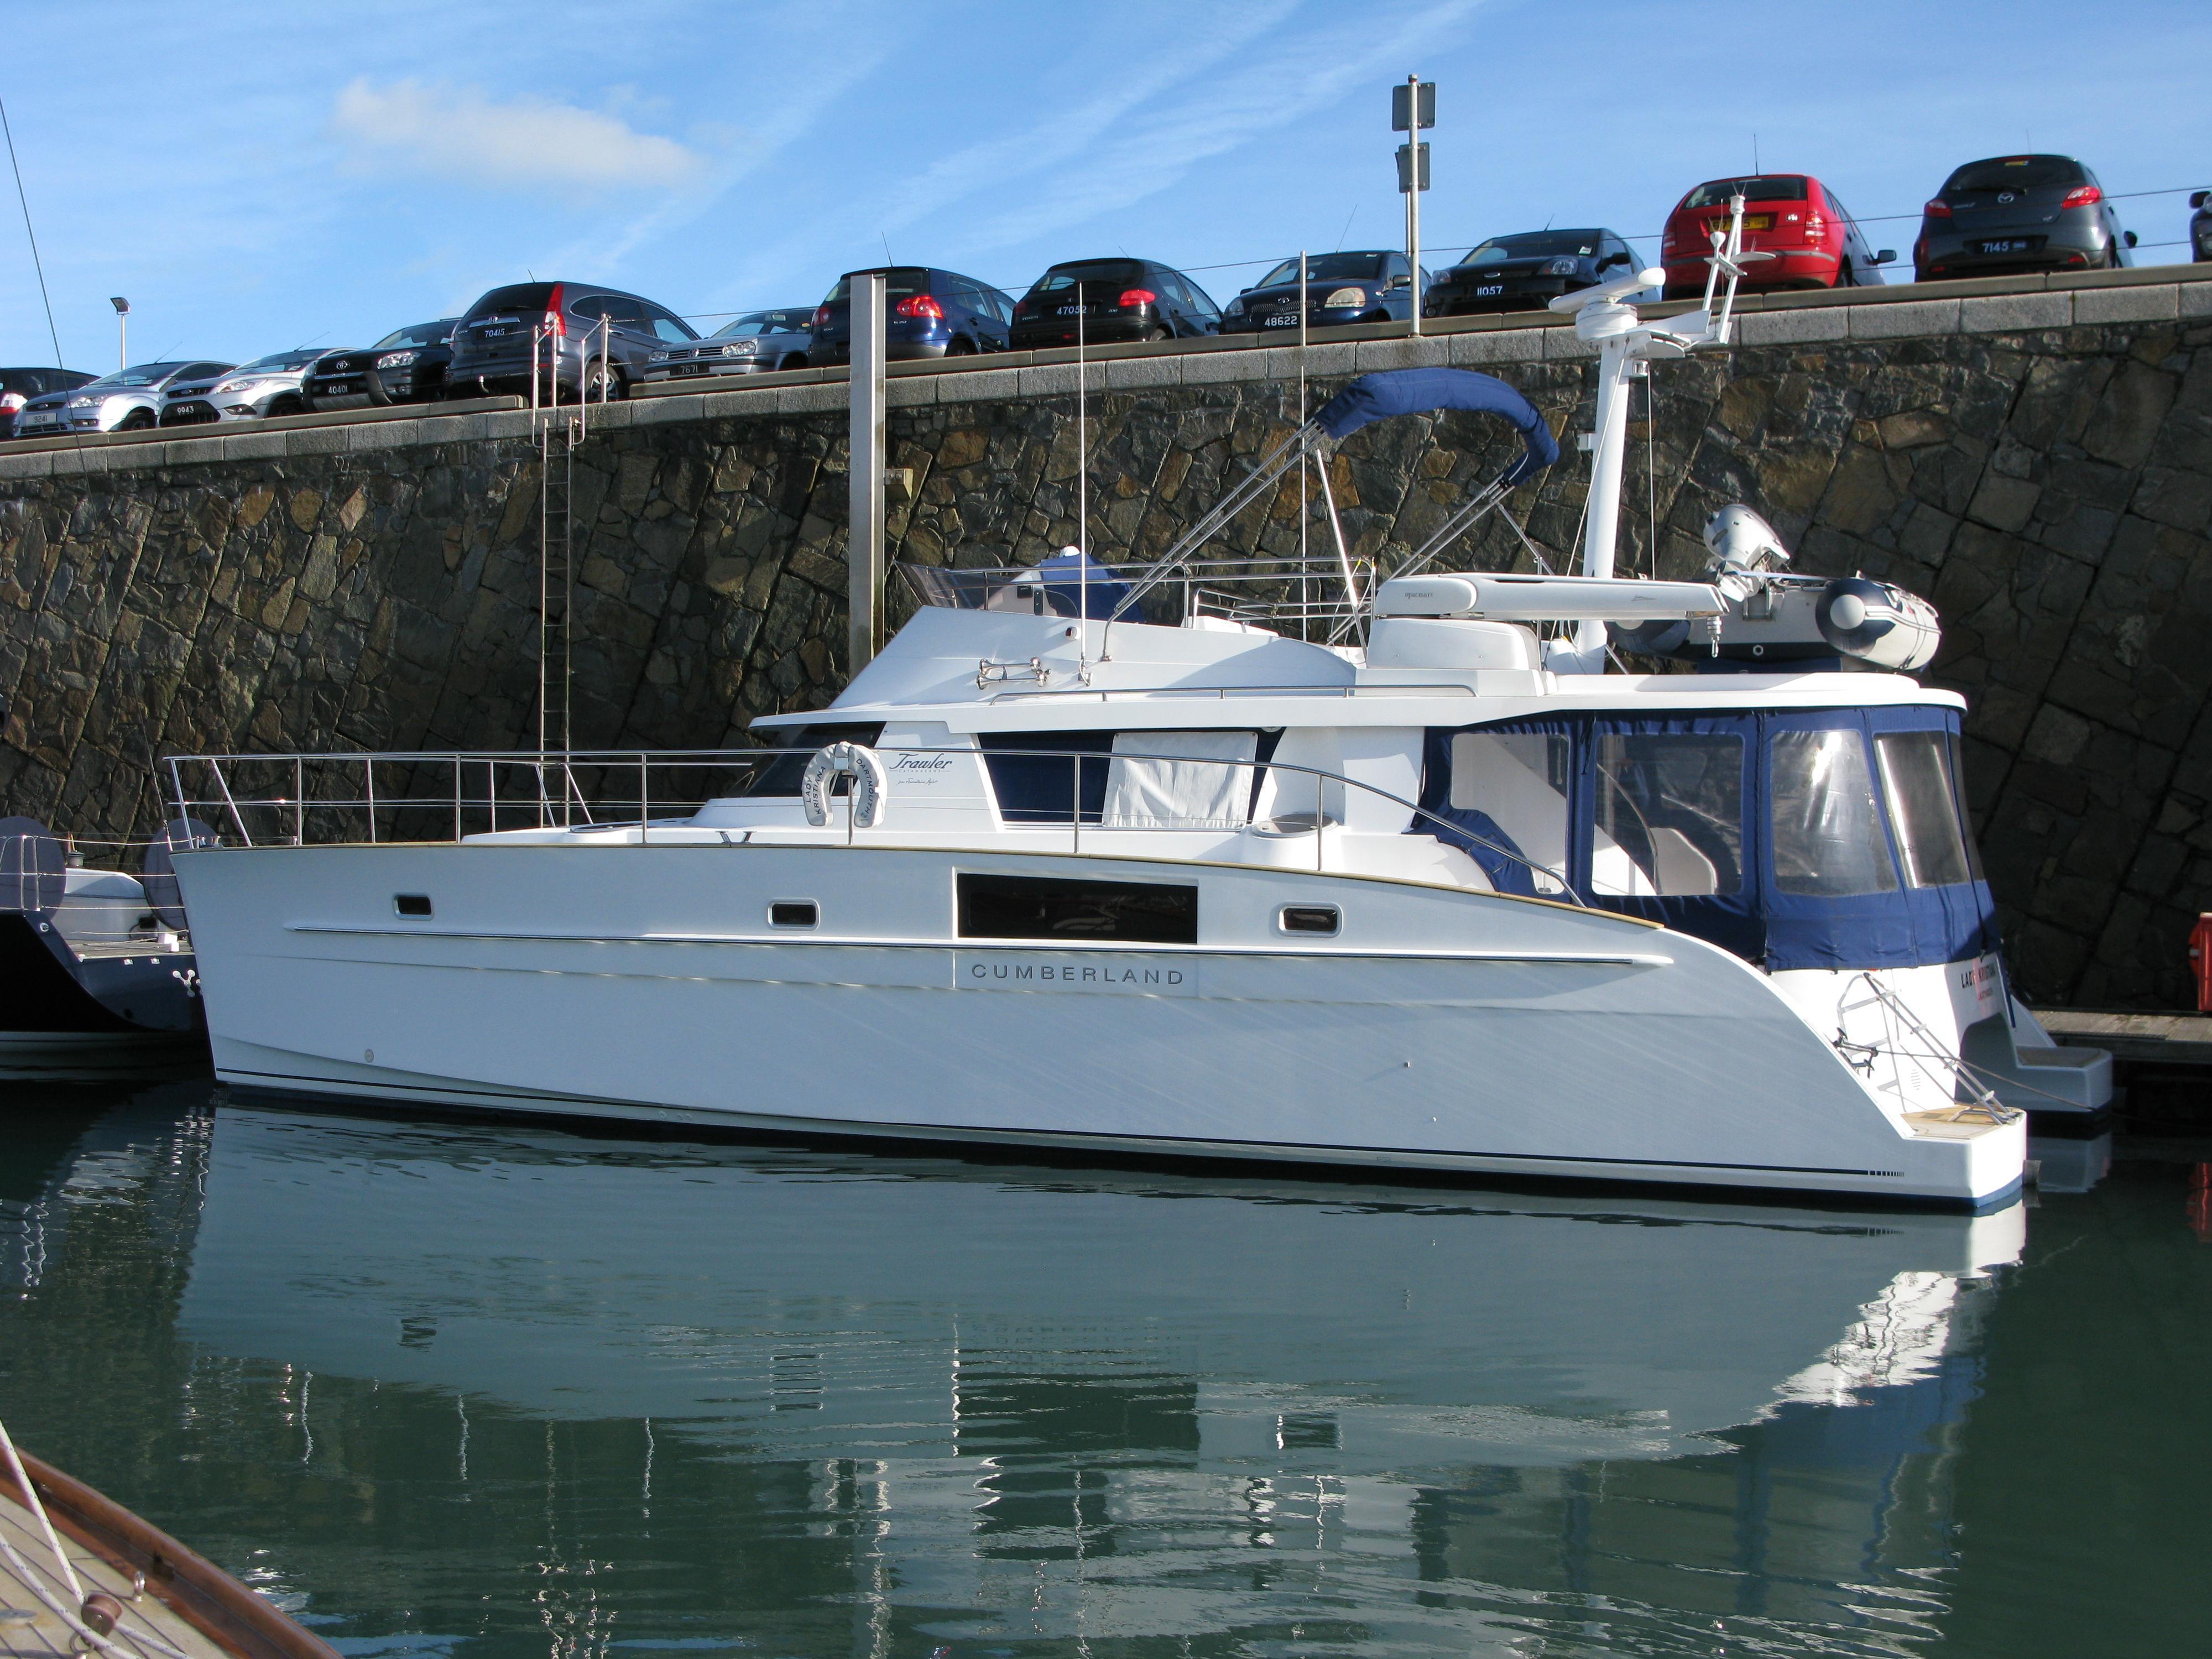 Fountaine Pajot Cumberland 44, Guernsey